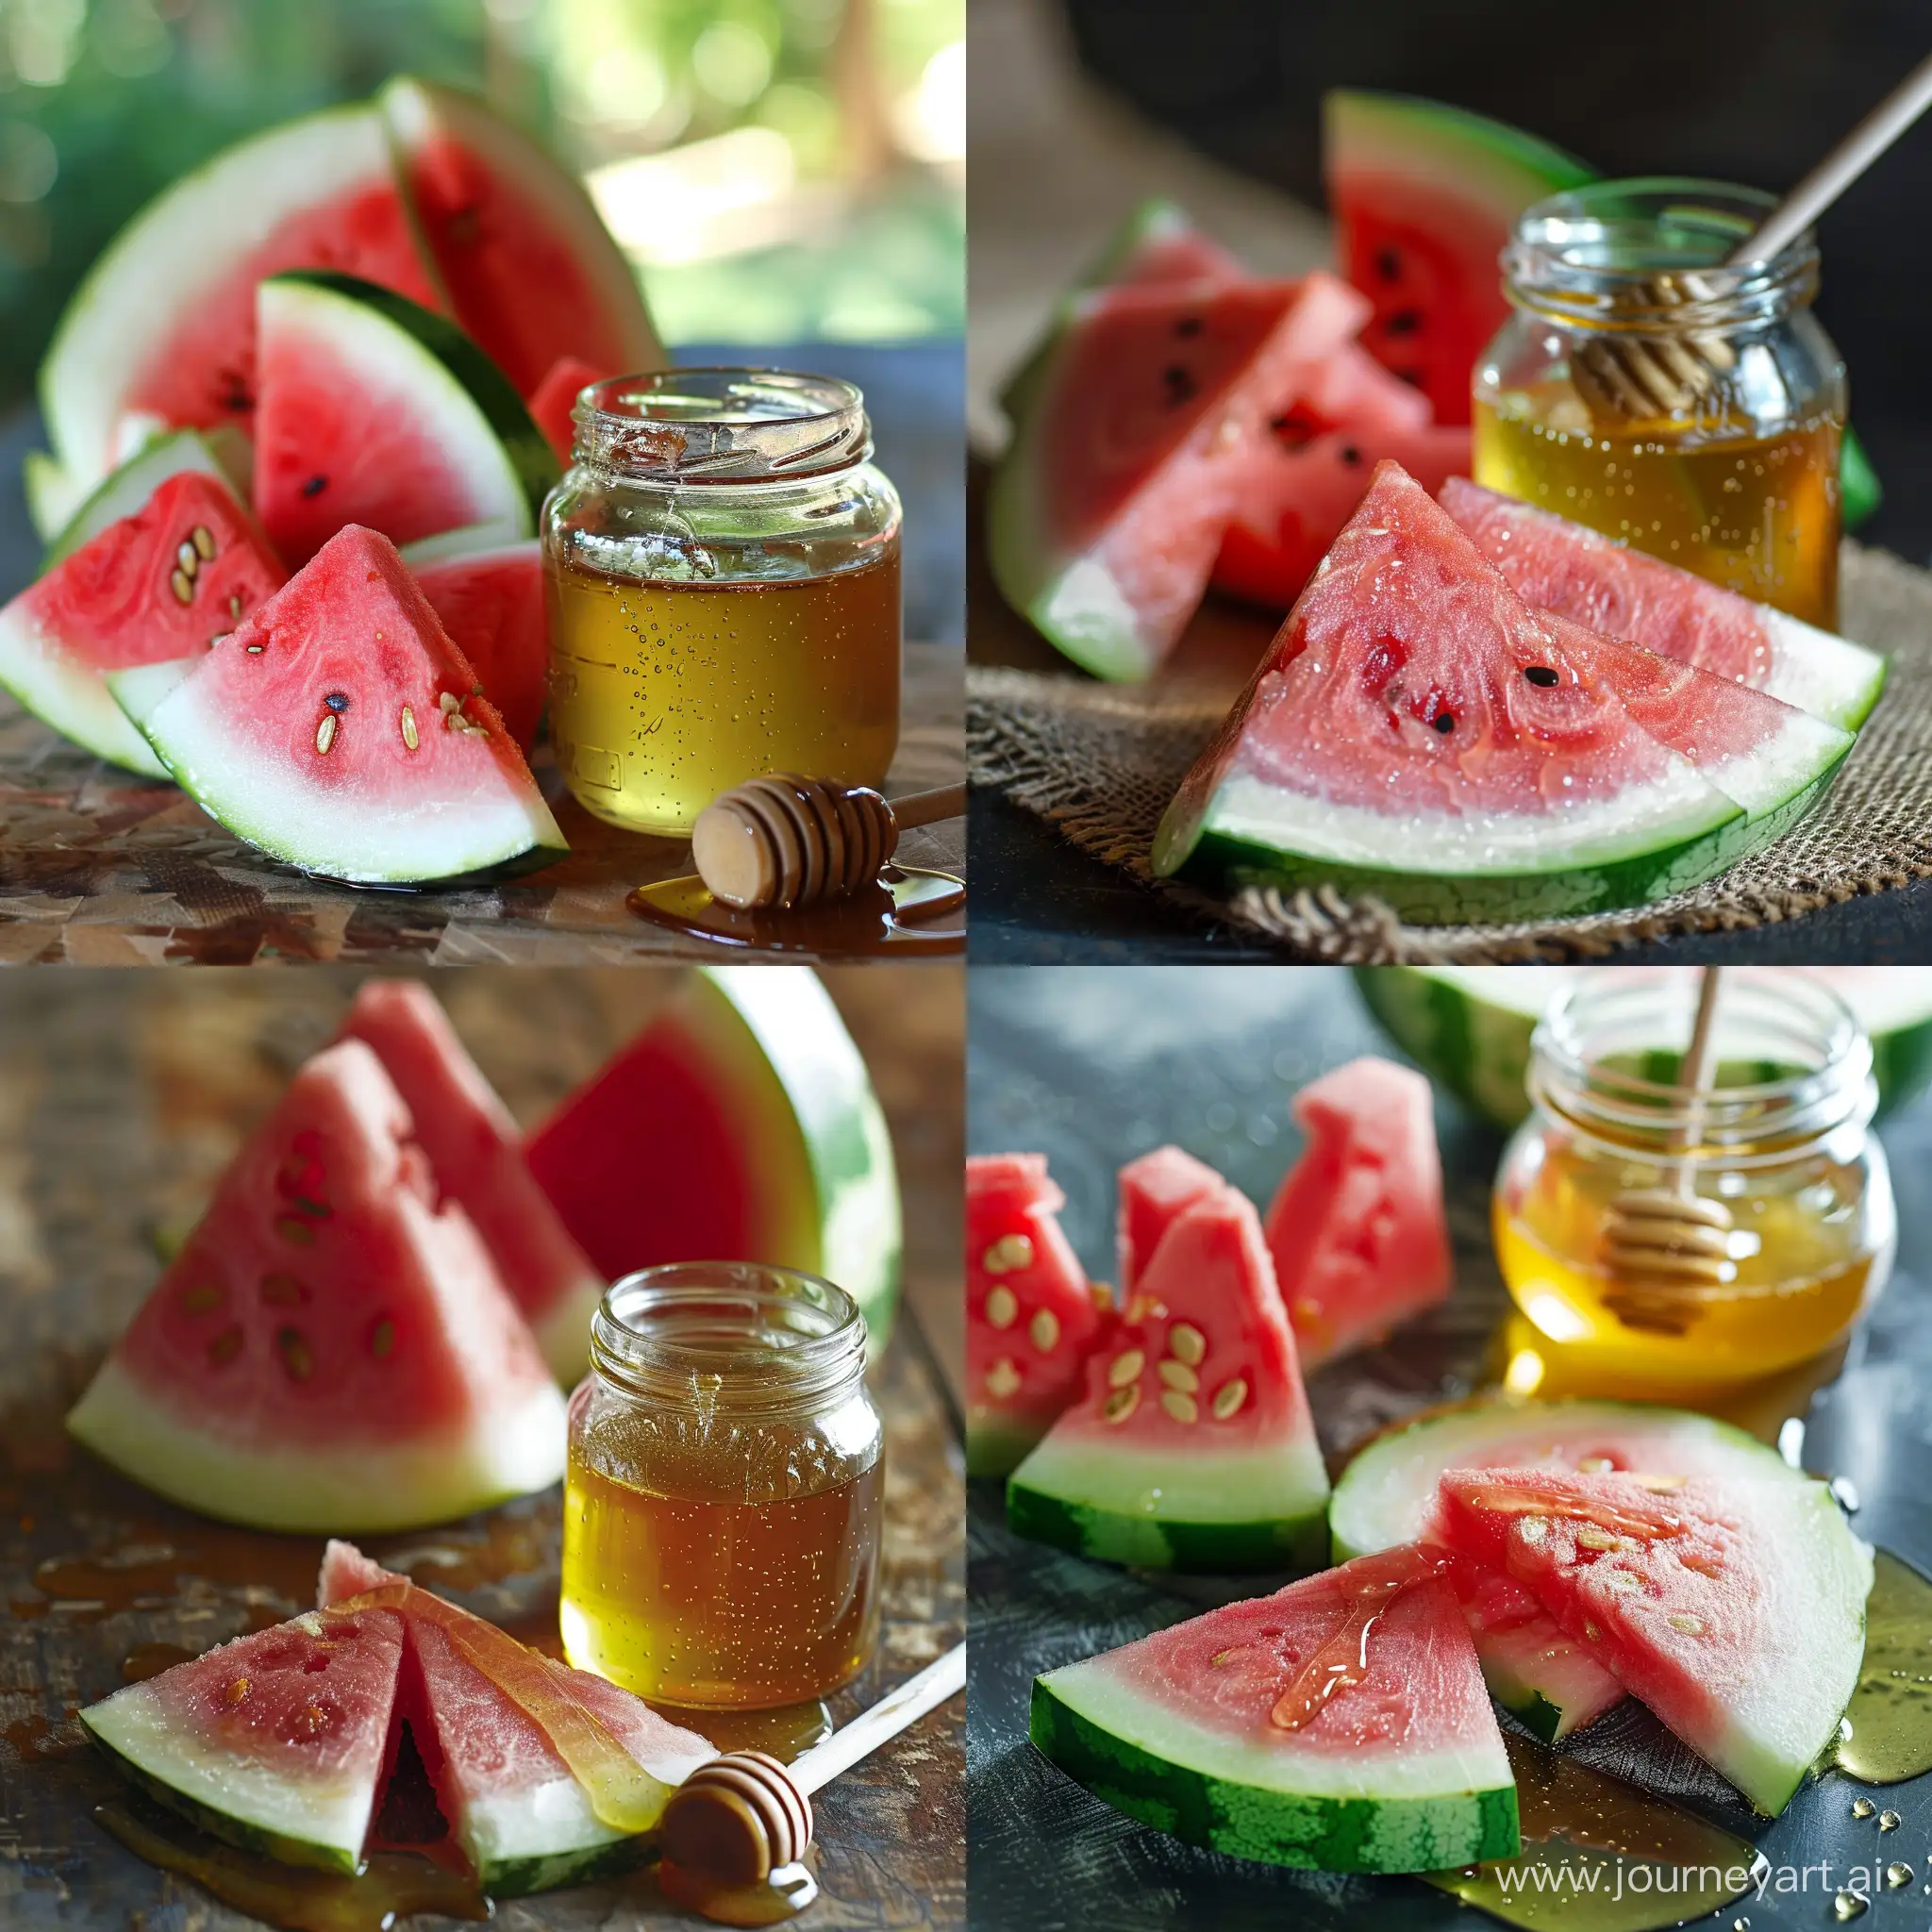 A natural and real picture of some pieces of watermelon. A jar of honey.